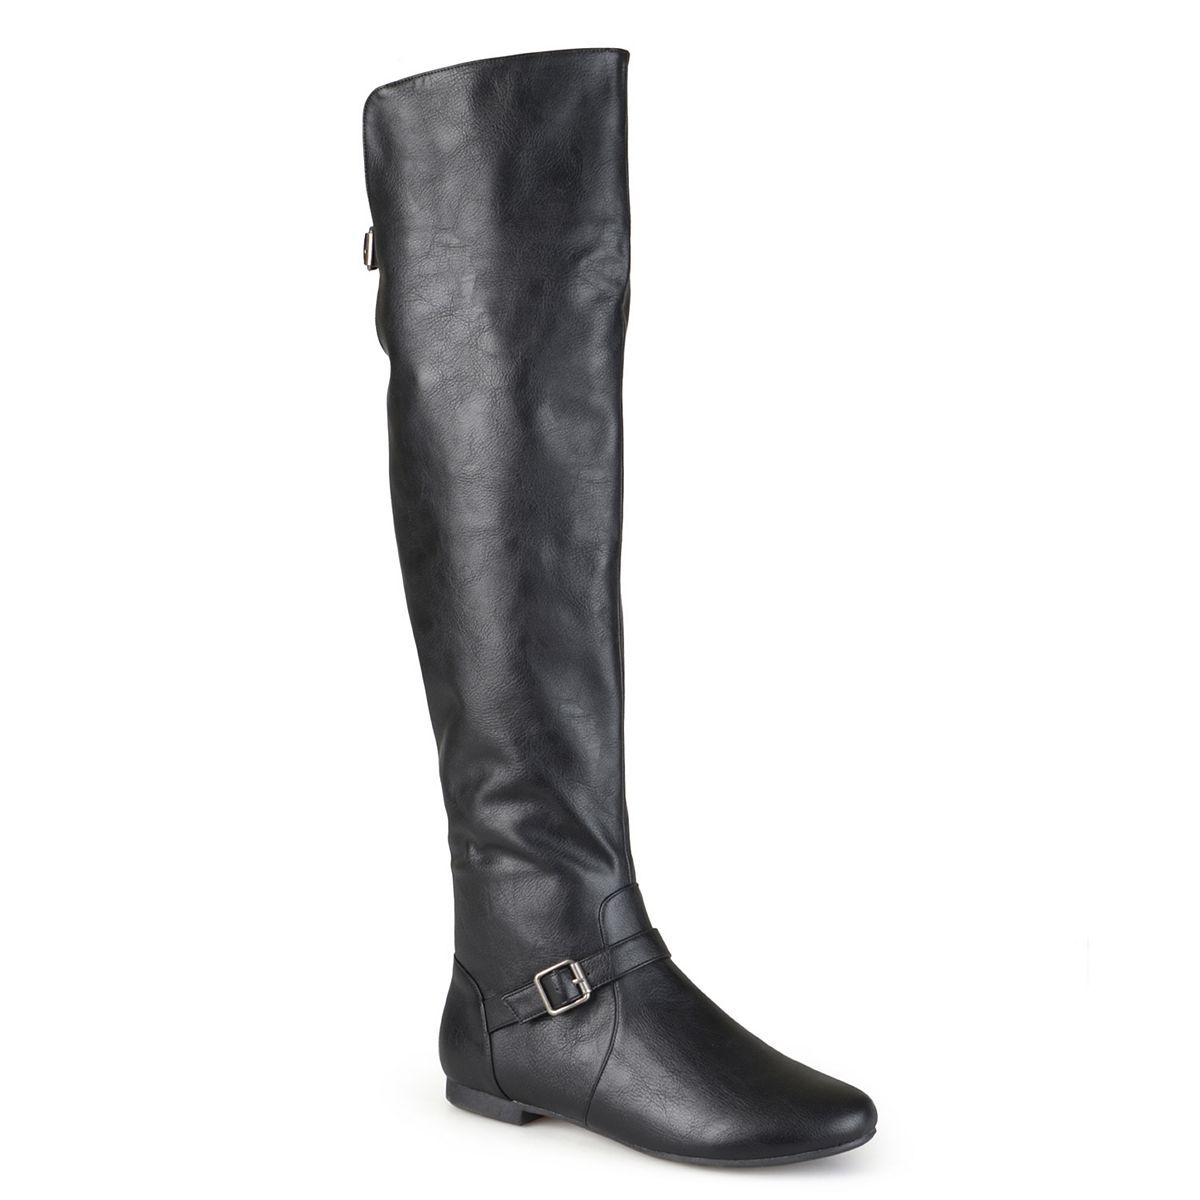 Journee Collection Loft Women's Knee-High Riding Boots | Kohl's